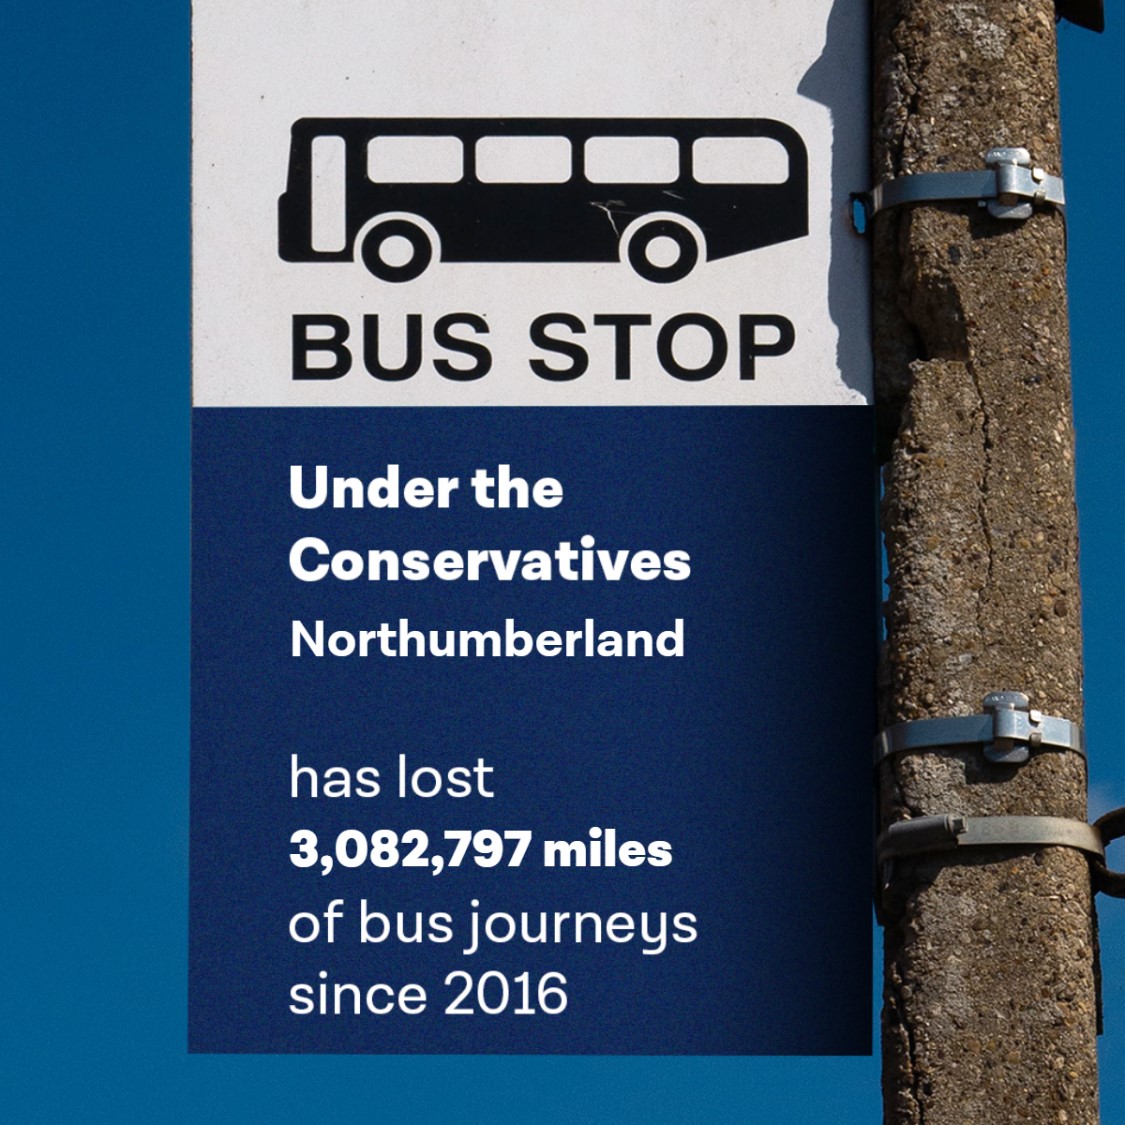 3 million miles of bus journeys lost in Northumberland